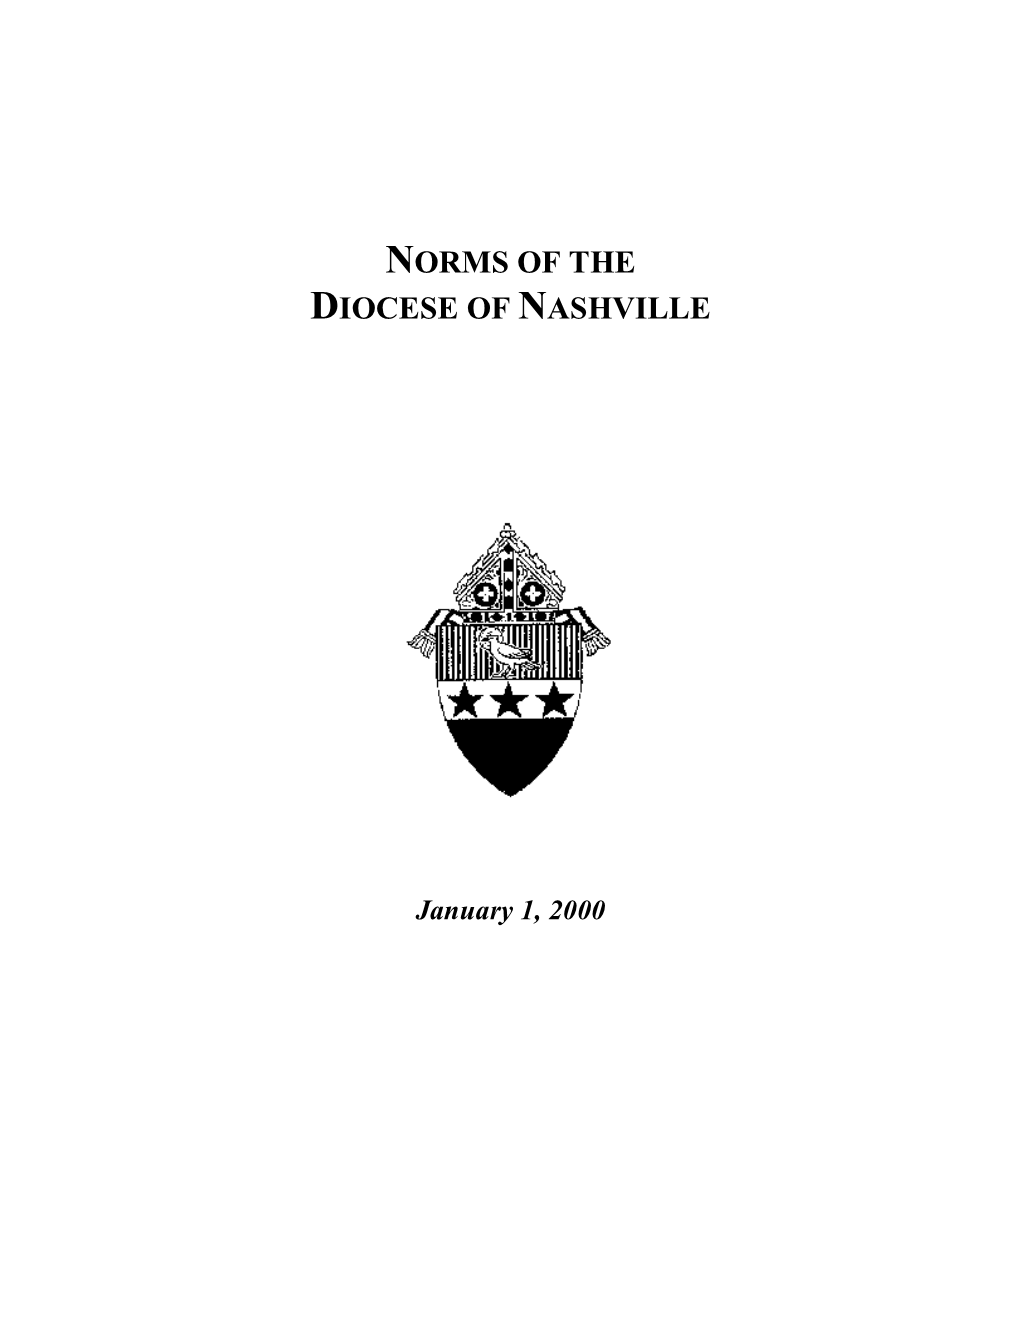 Norms of the Diocese of Nashville